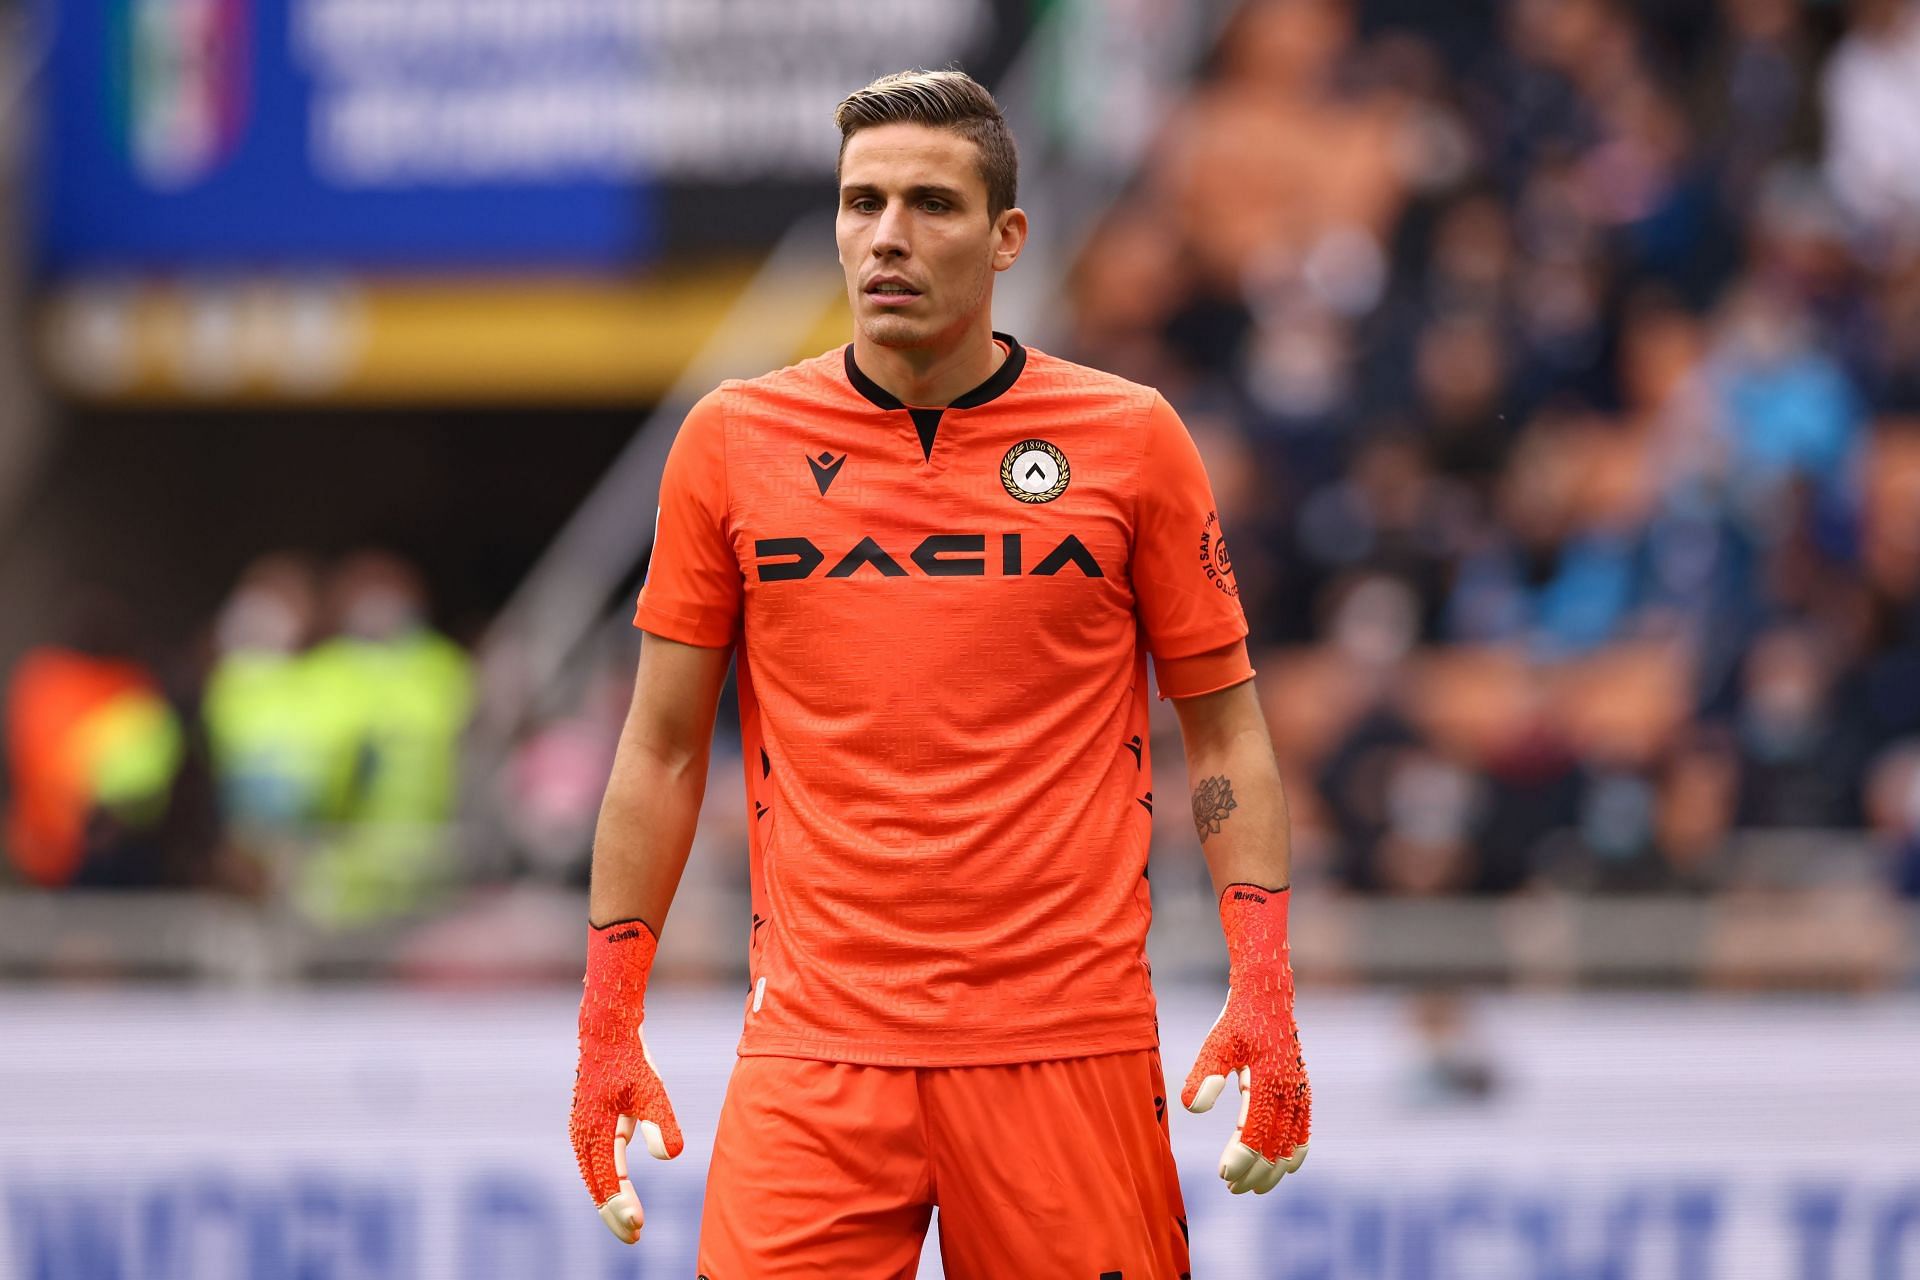 Silvestri will be a huge miss for Udinese